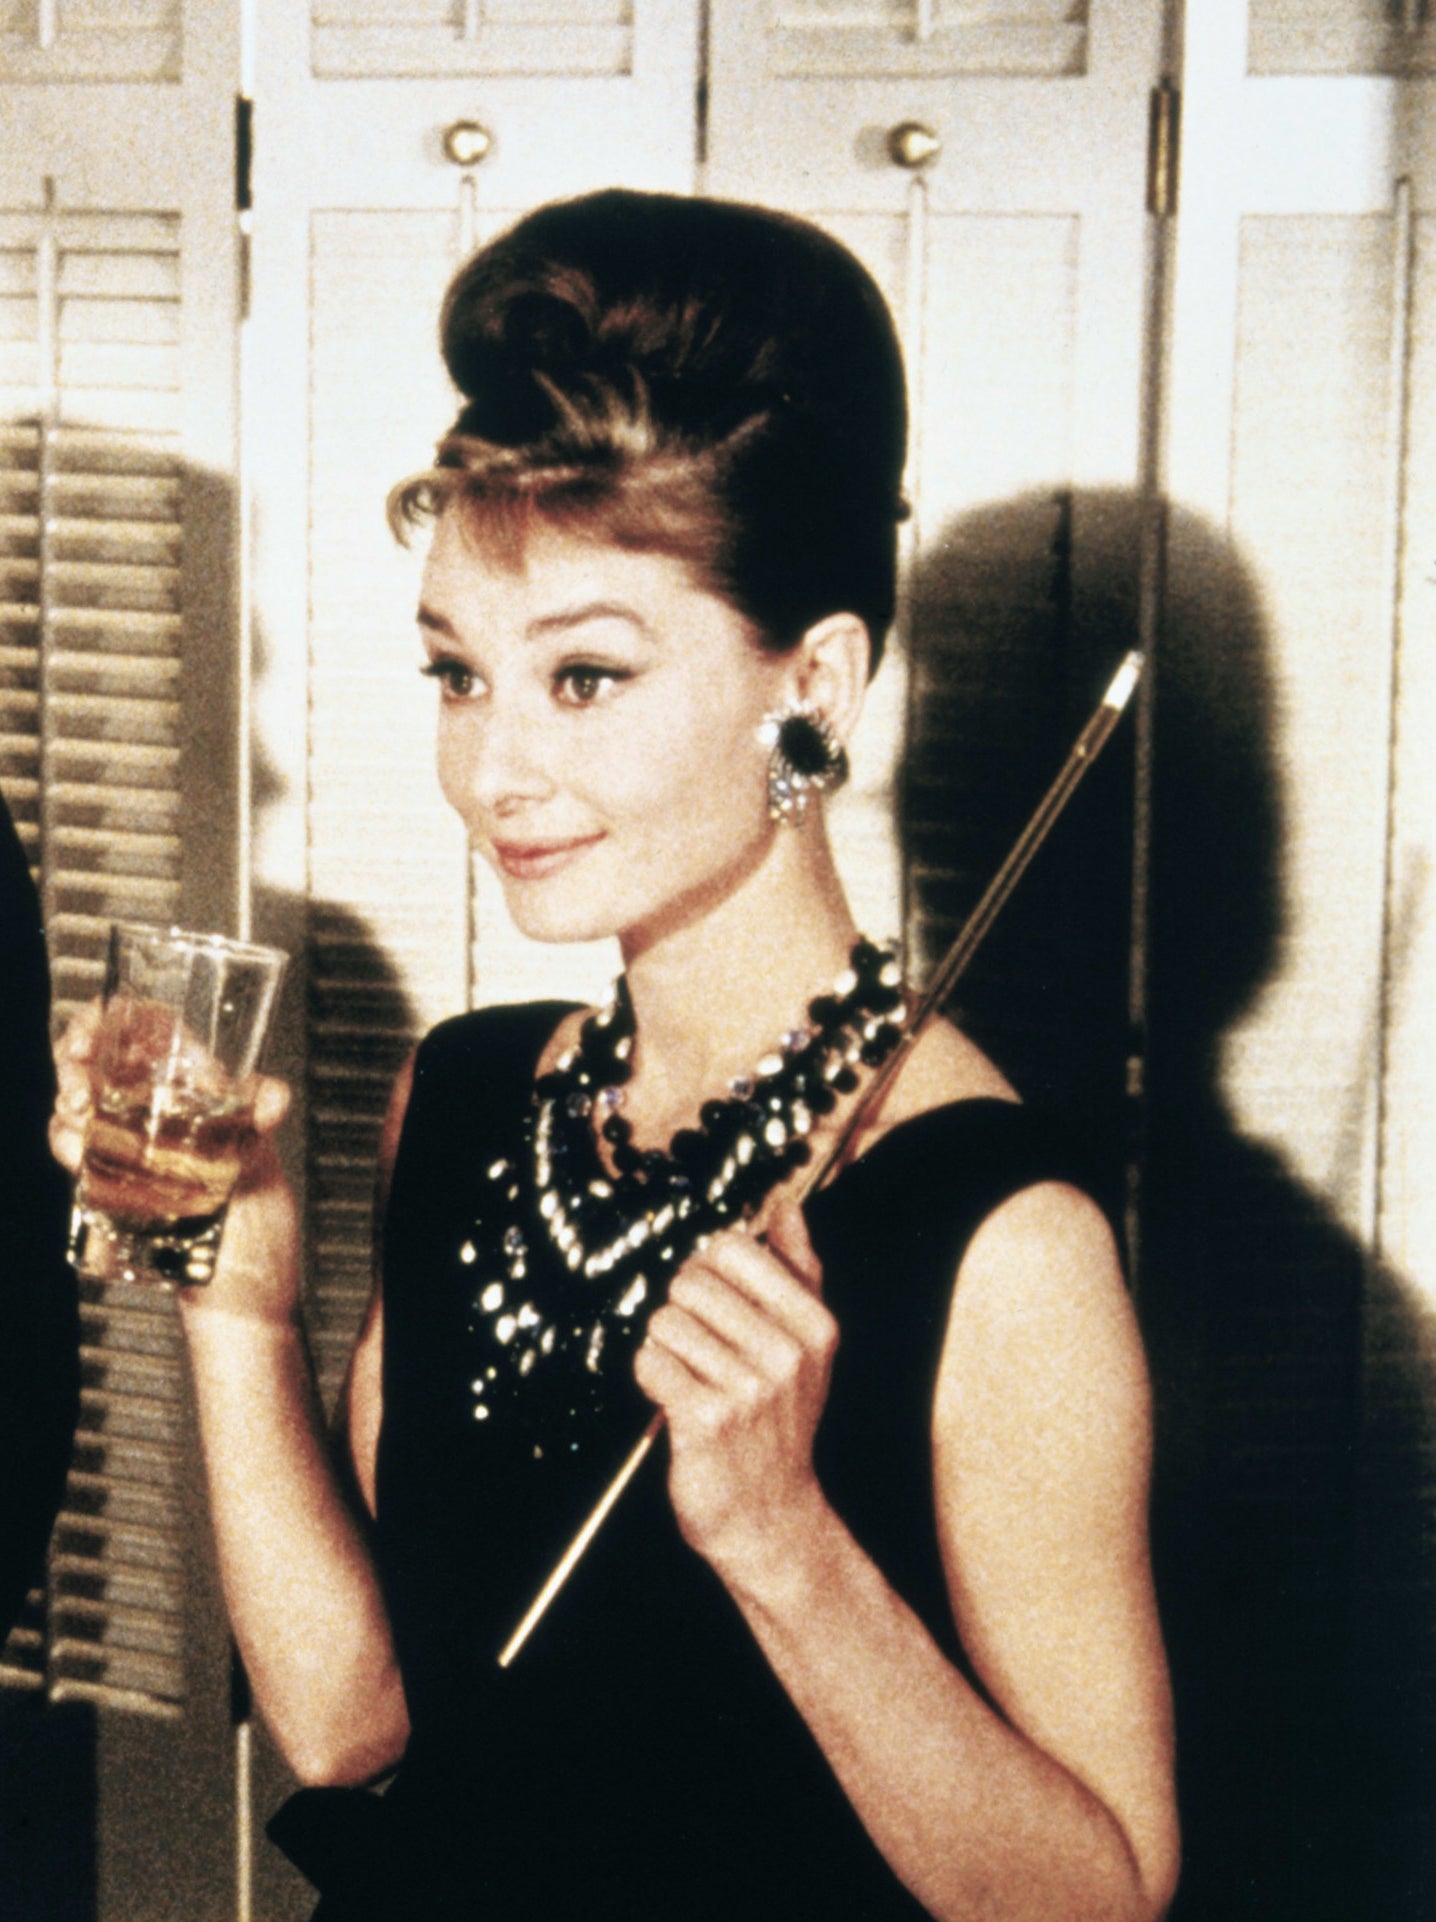 Audrey as Holly holding a glass